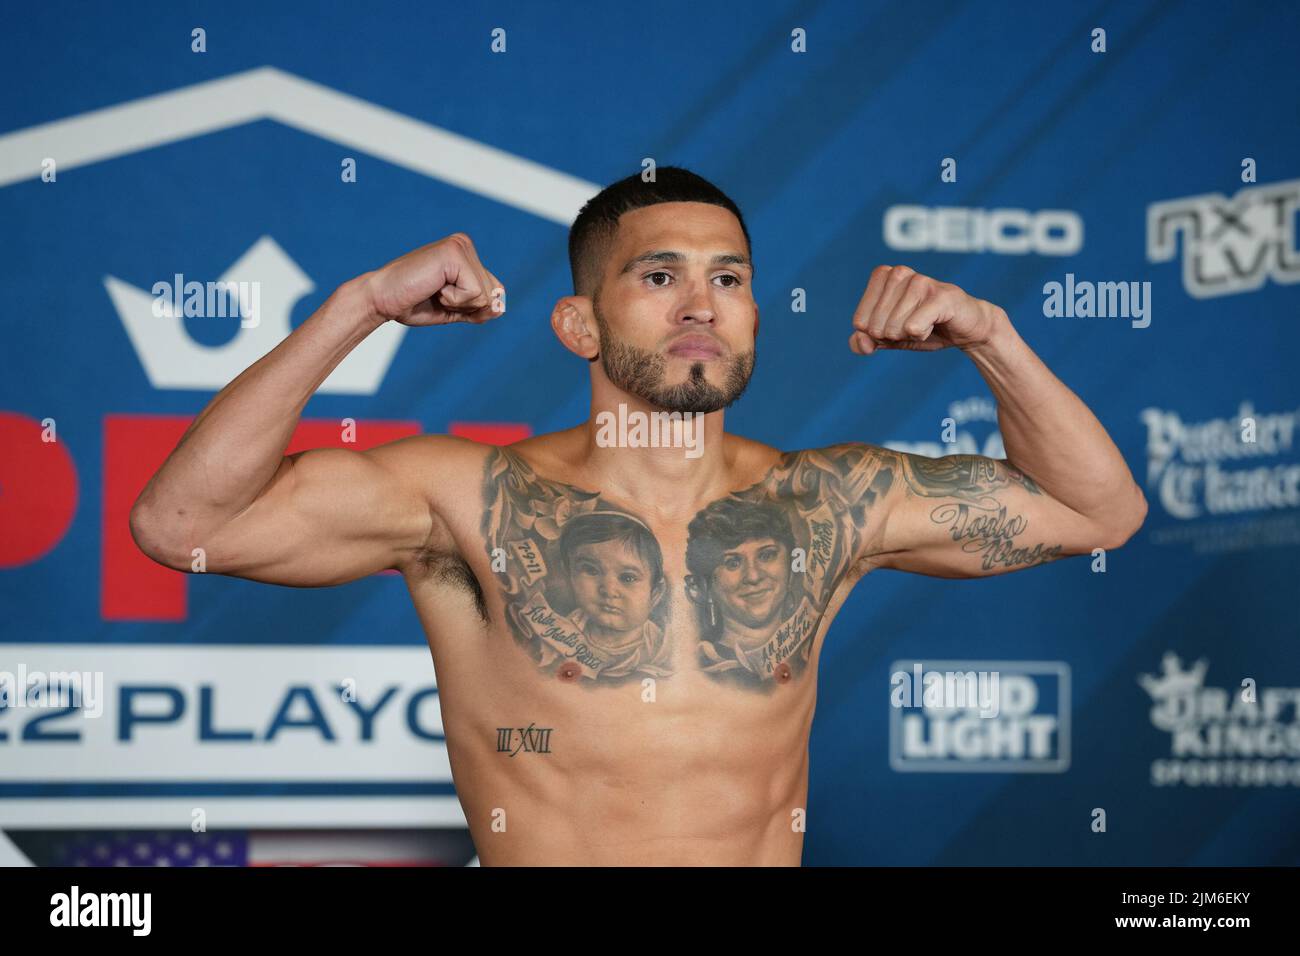 NEW YORK CITY, NY - August 4: Anthony Pettis steps on the scale for the official weigh-ins at The New Yorker Hotel for 2022 PFL Playoffs Semi-Finals : Official Weigh-ins on August 4, 2022 in New York City, NY, United States. (Photo by Louis Grasse/PxImages) Stock Photo